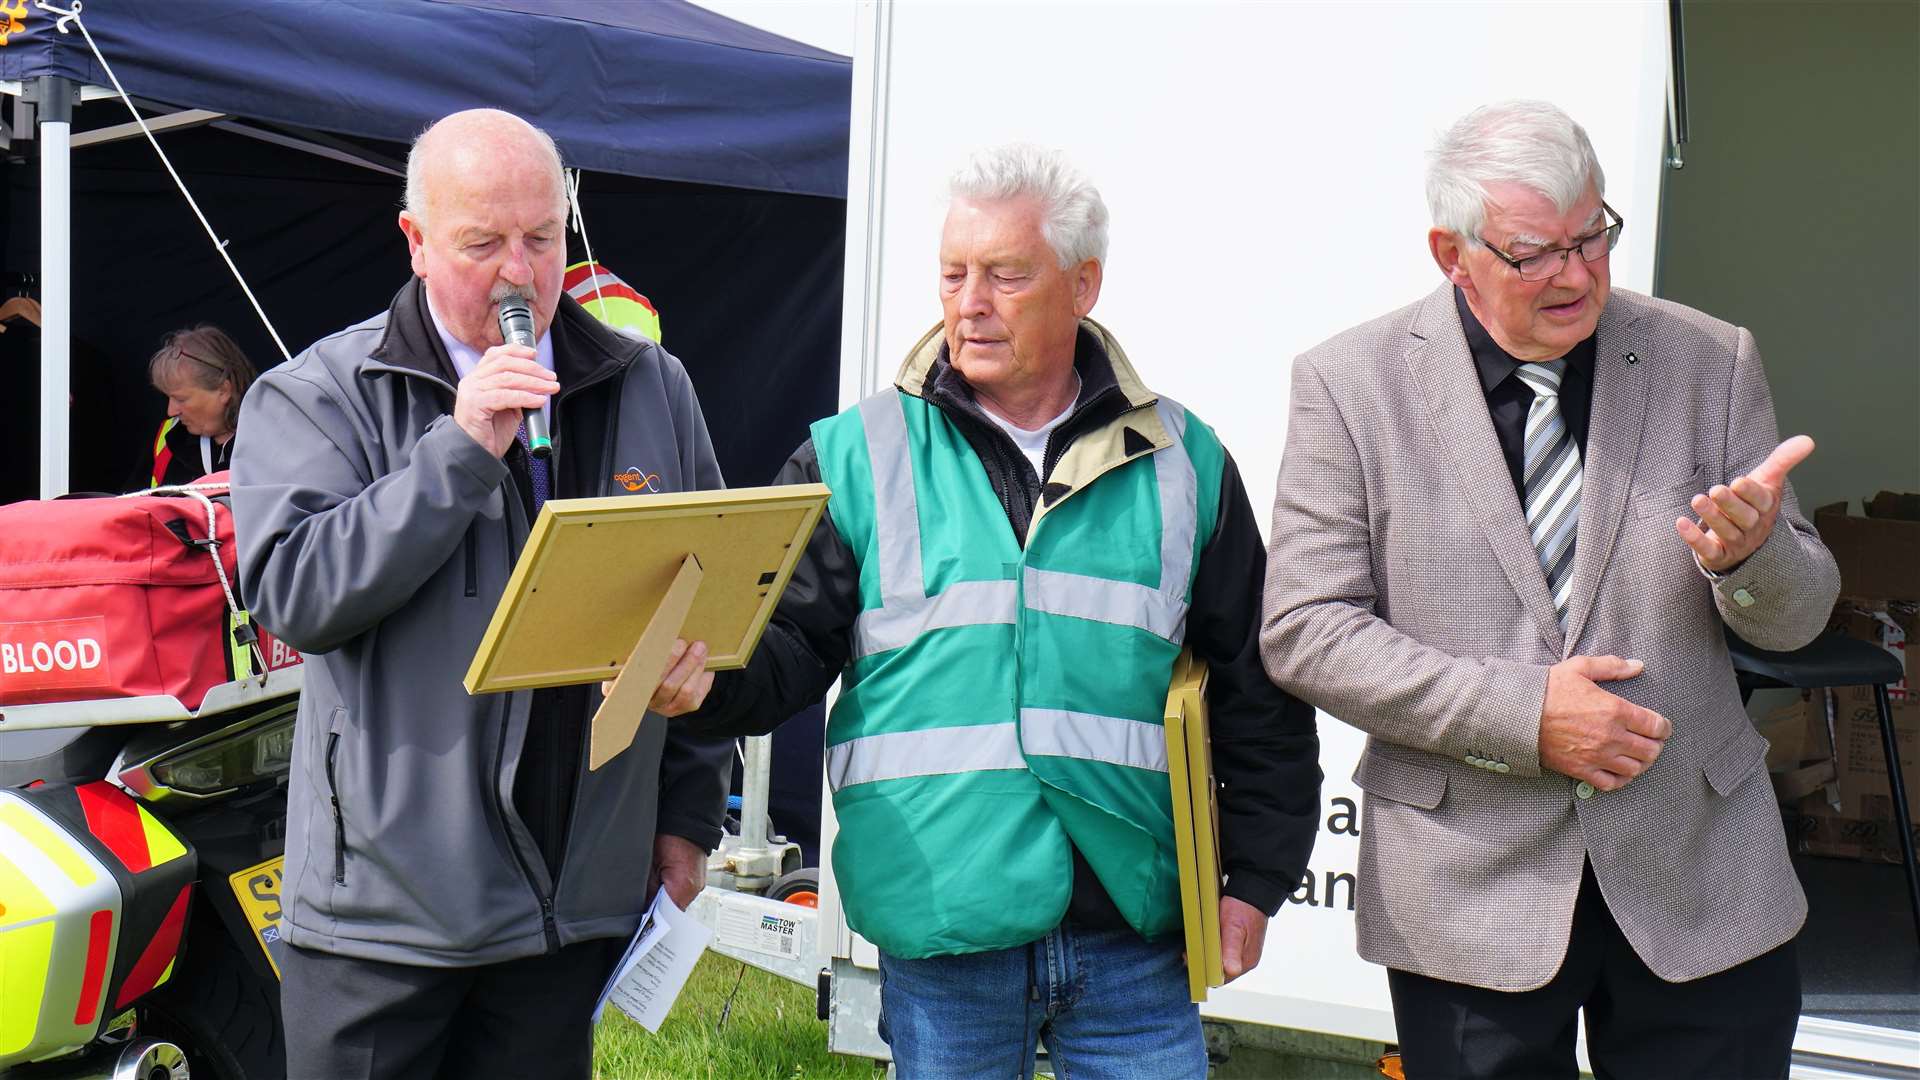 Willie Mackay, at left, compered the event and club members Les Bremner and Iain Sutherland stand next to him as the awards are handed out. Picture: DGS